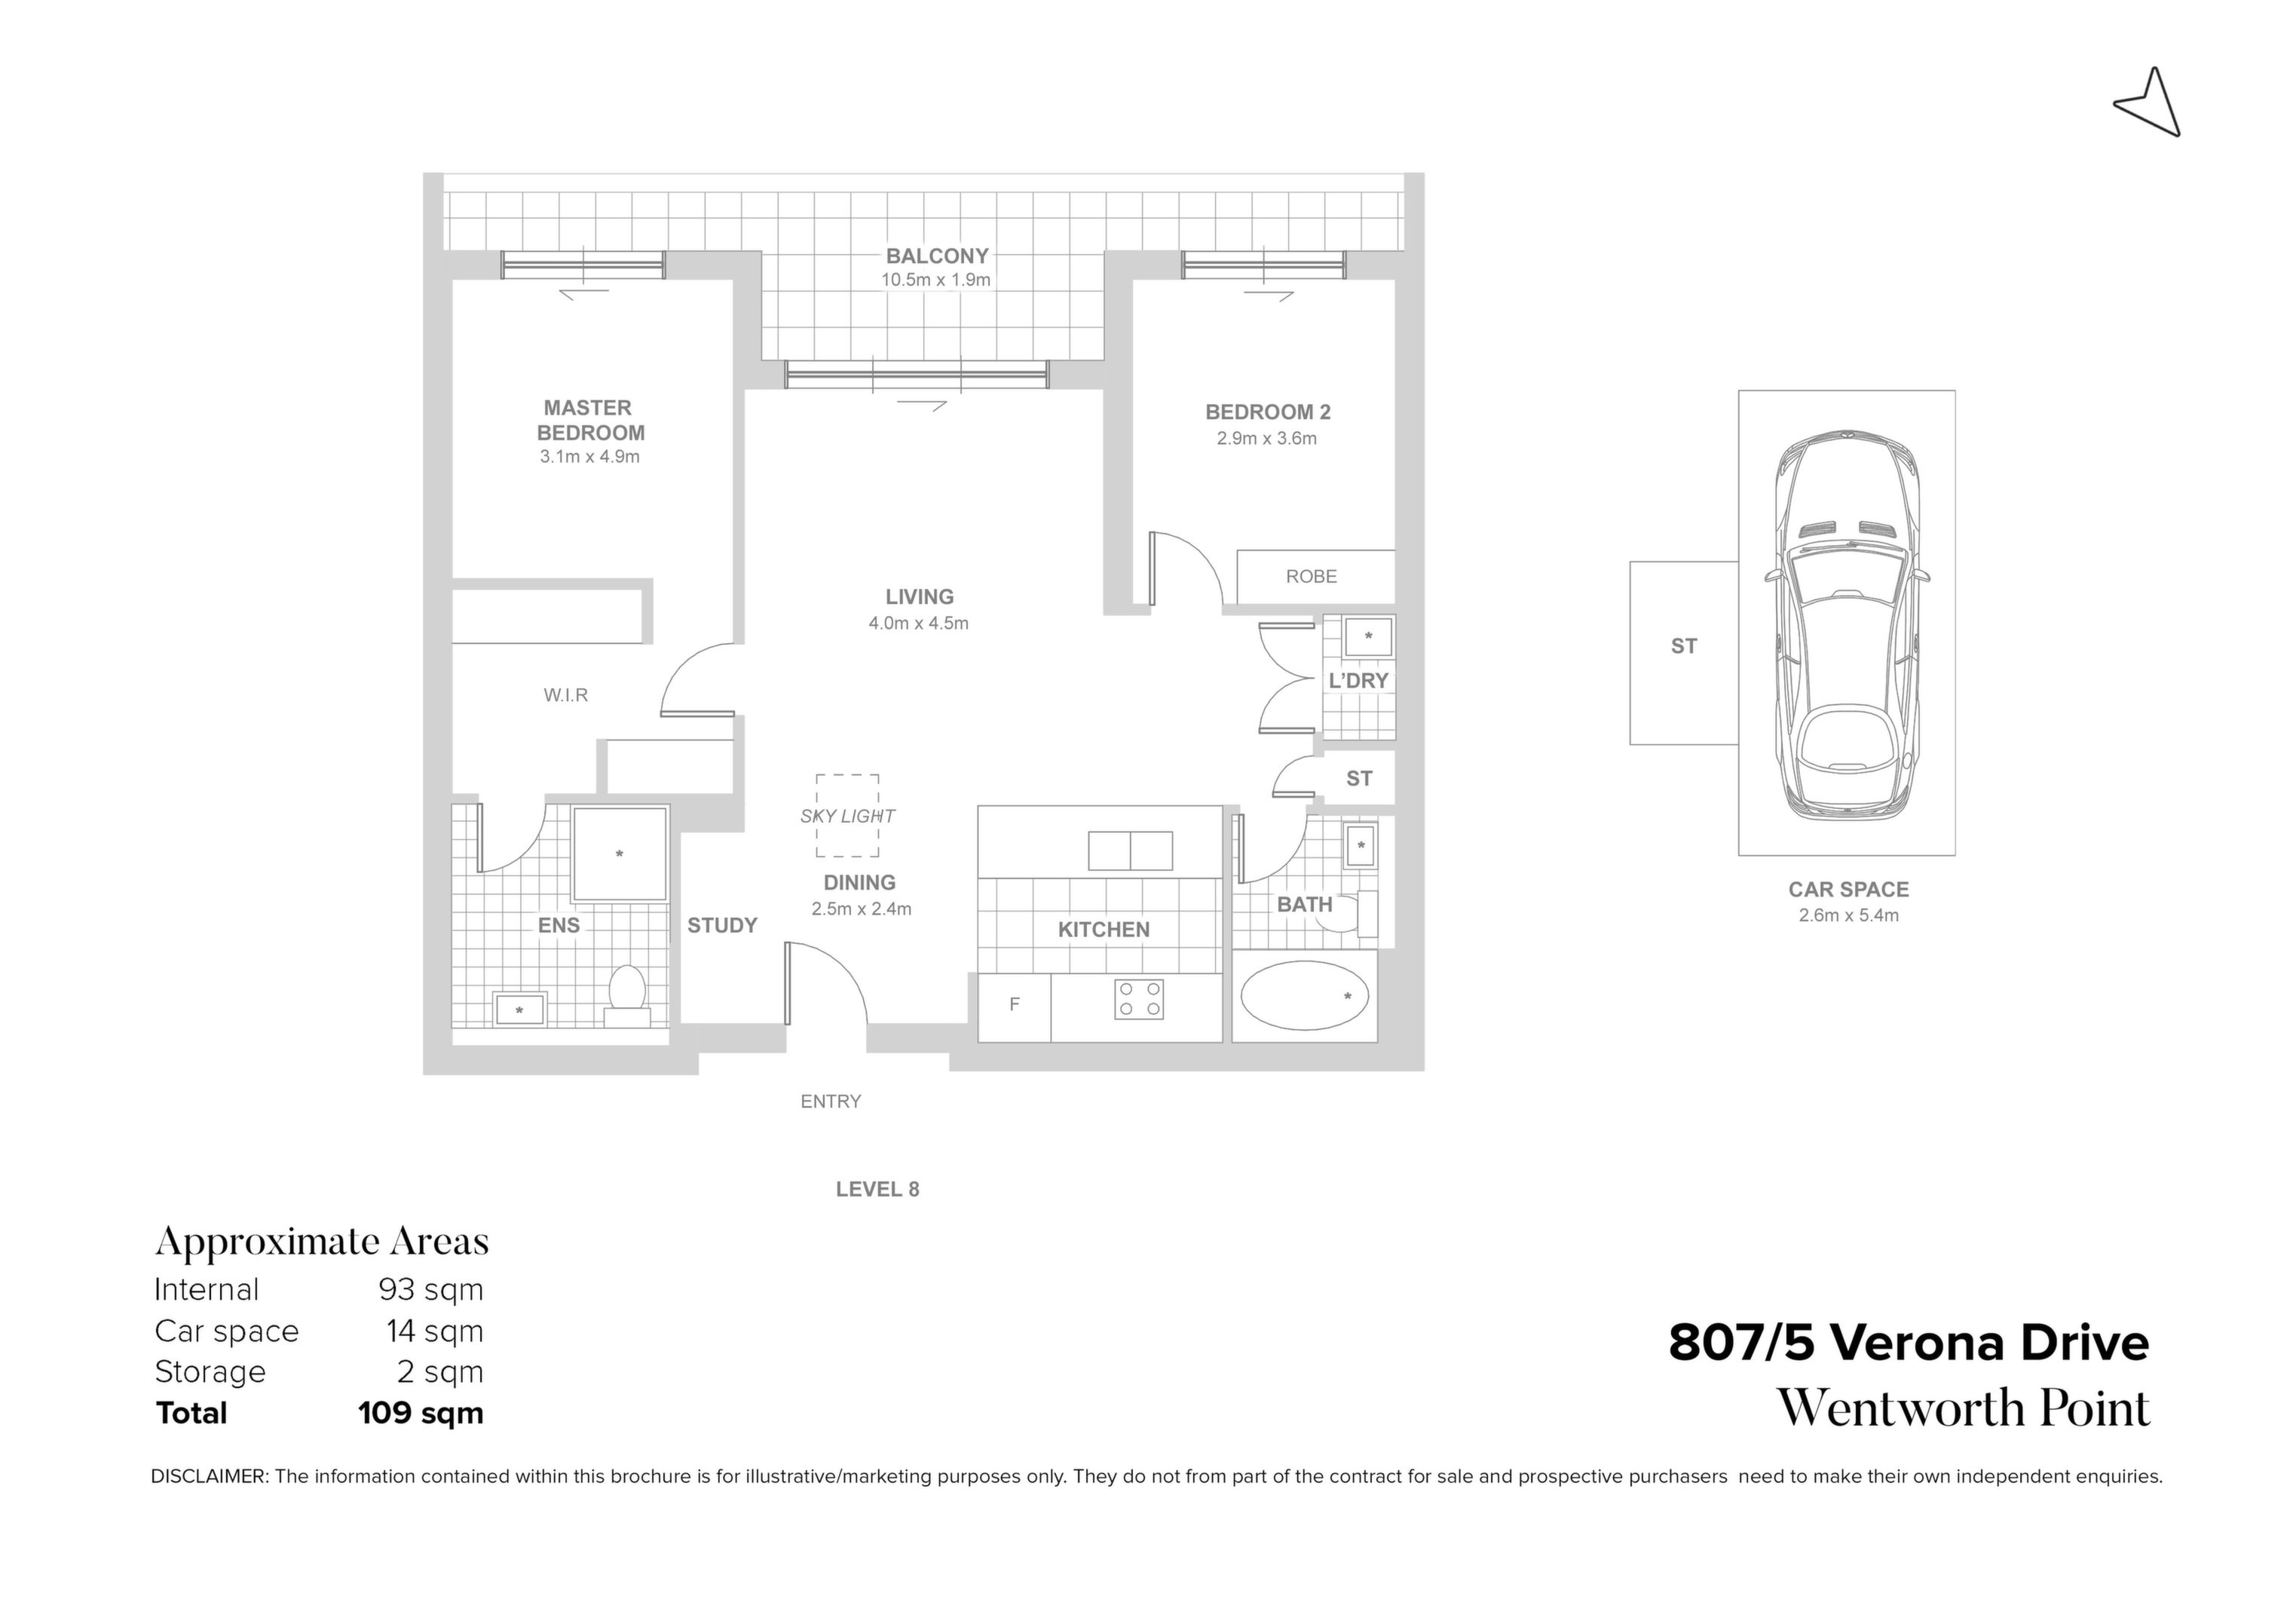 807/5 Verona Drive, Wentworth Point Sold by Chidiac Realty - floorplan